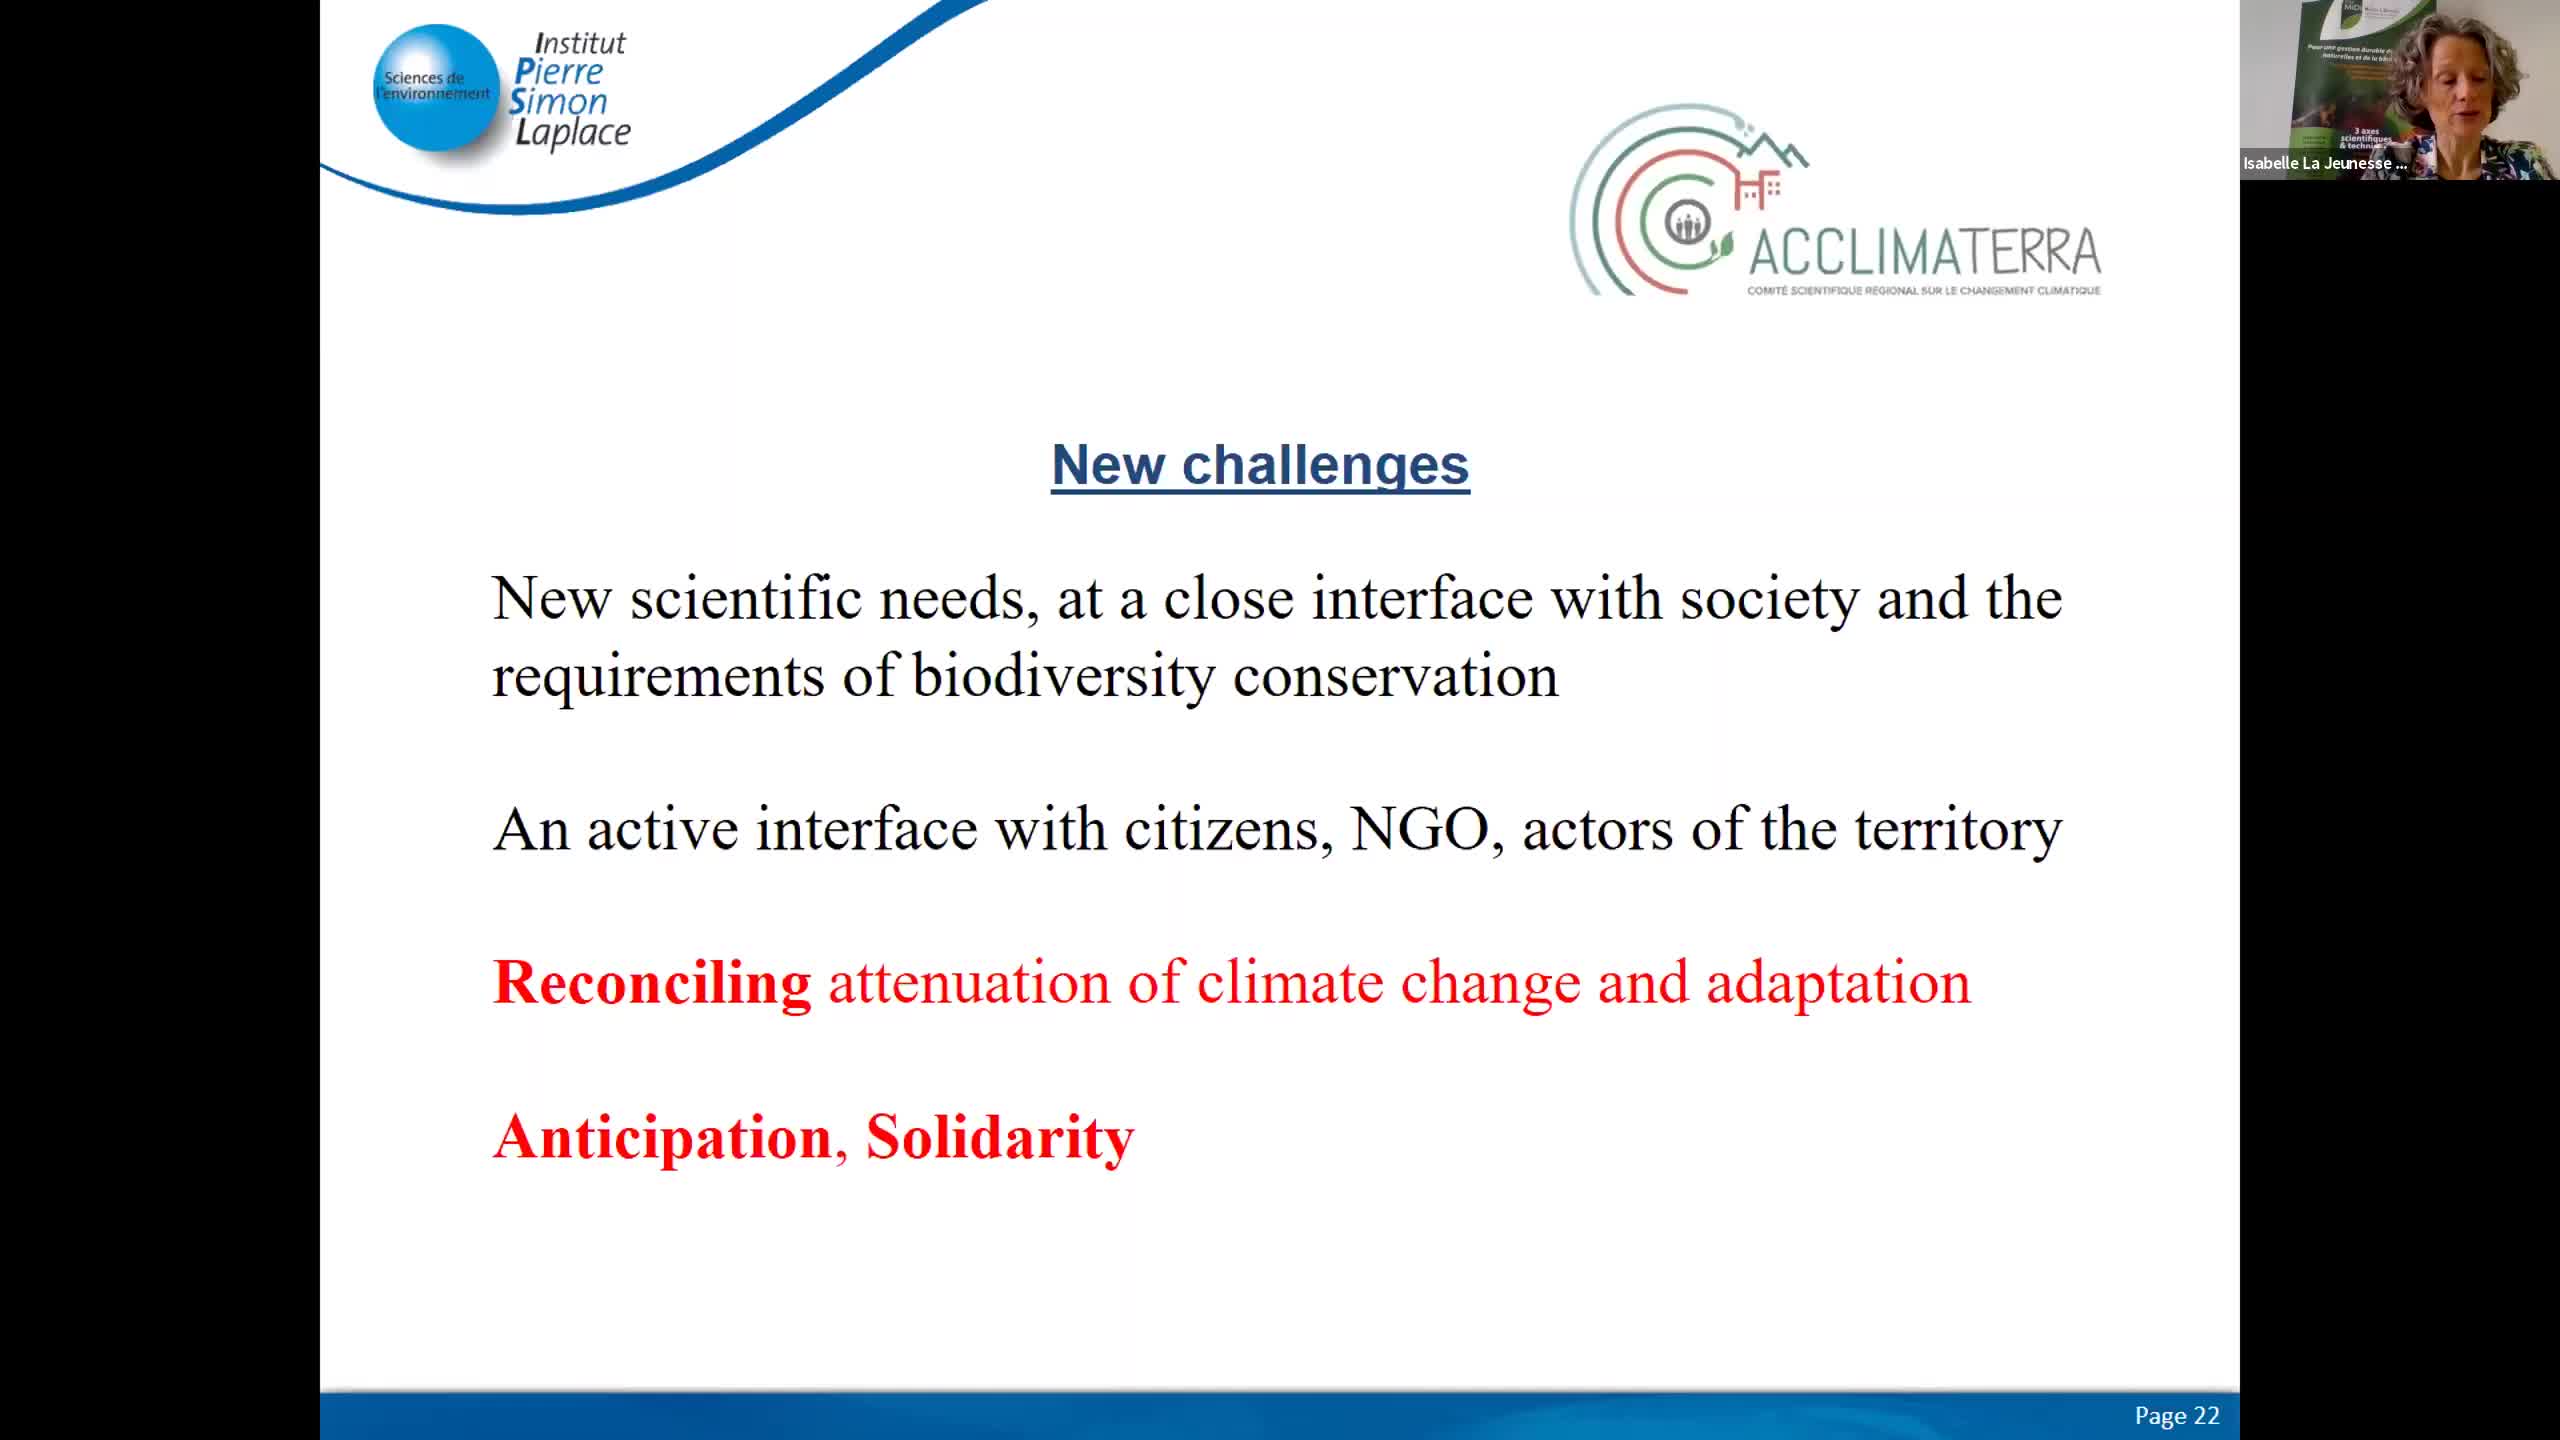 S1- Adaptation to climate change and governance